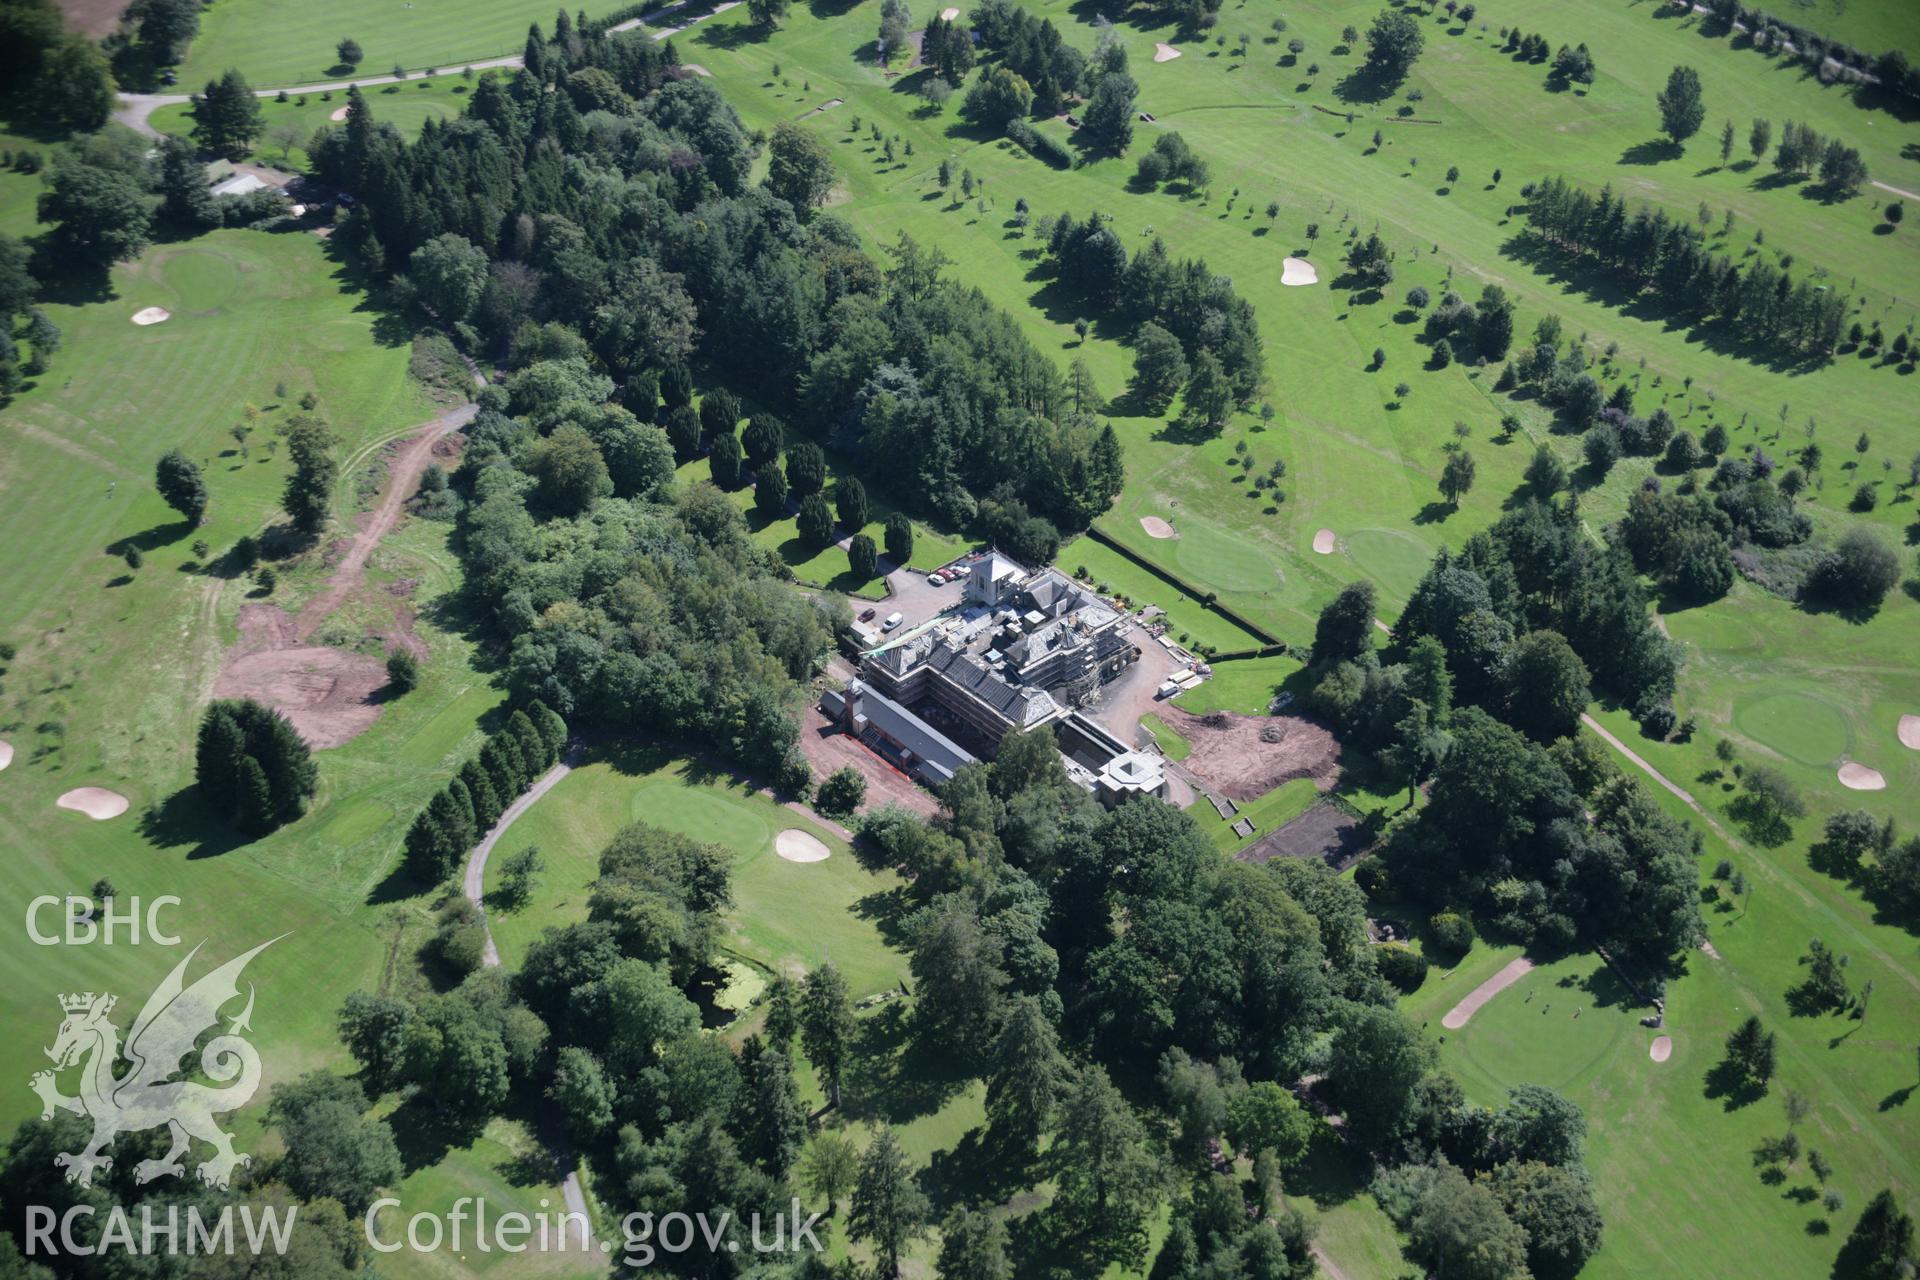 RCAHMW colour oblique aerial photograph of Penoyre Country House, in general view from north-west. Taken on 02 September 2005 by Toby Driver